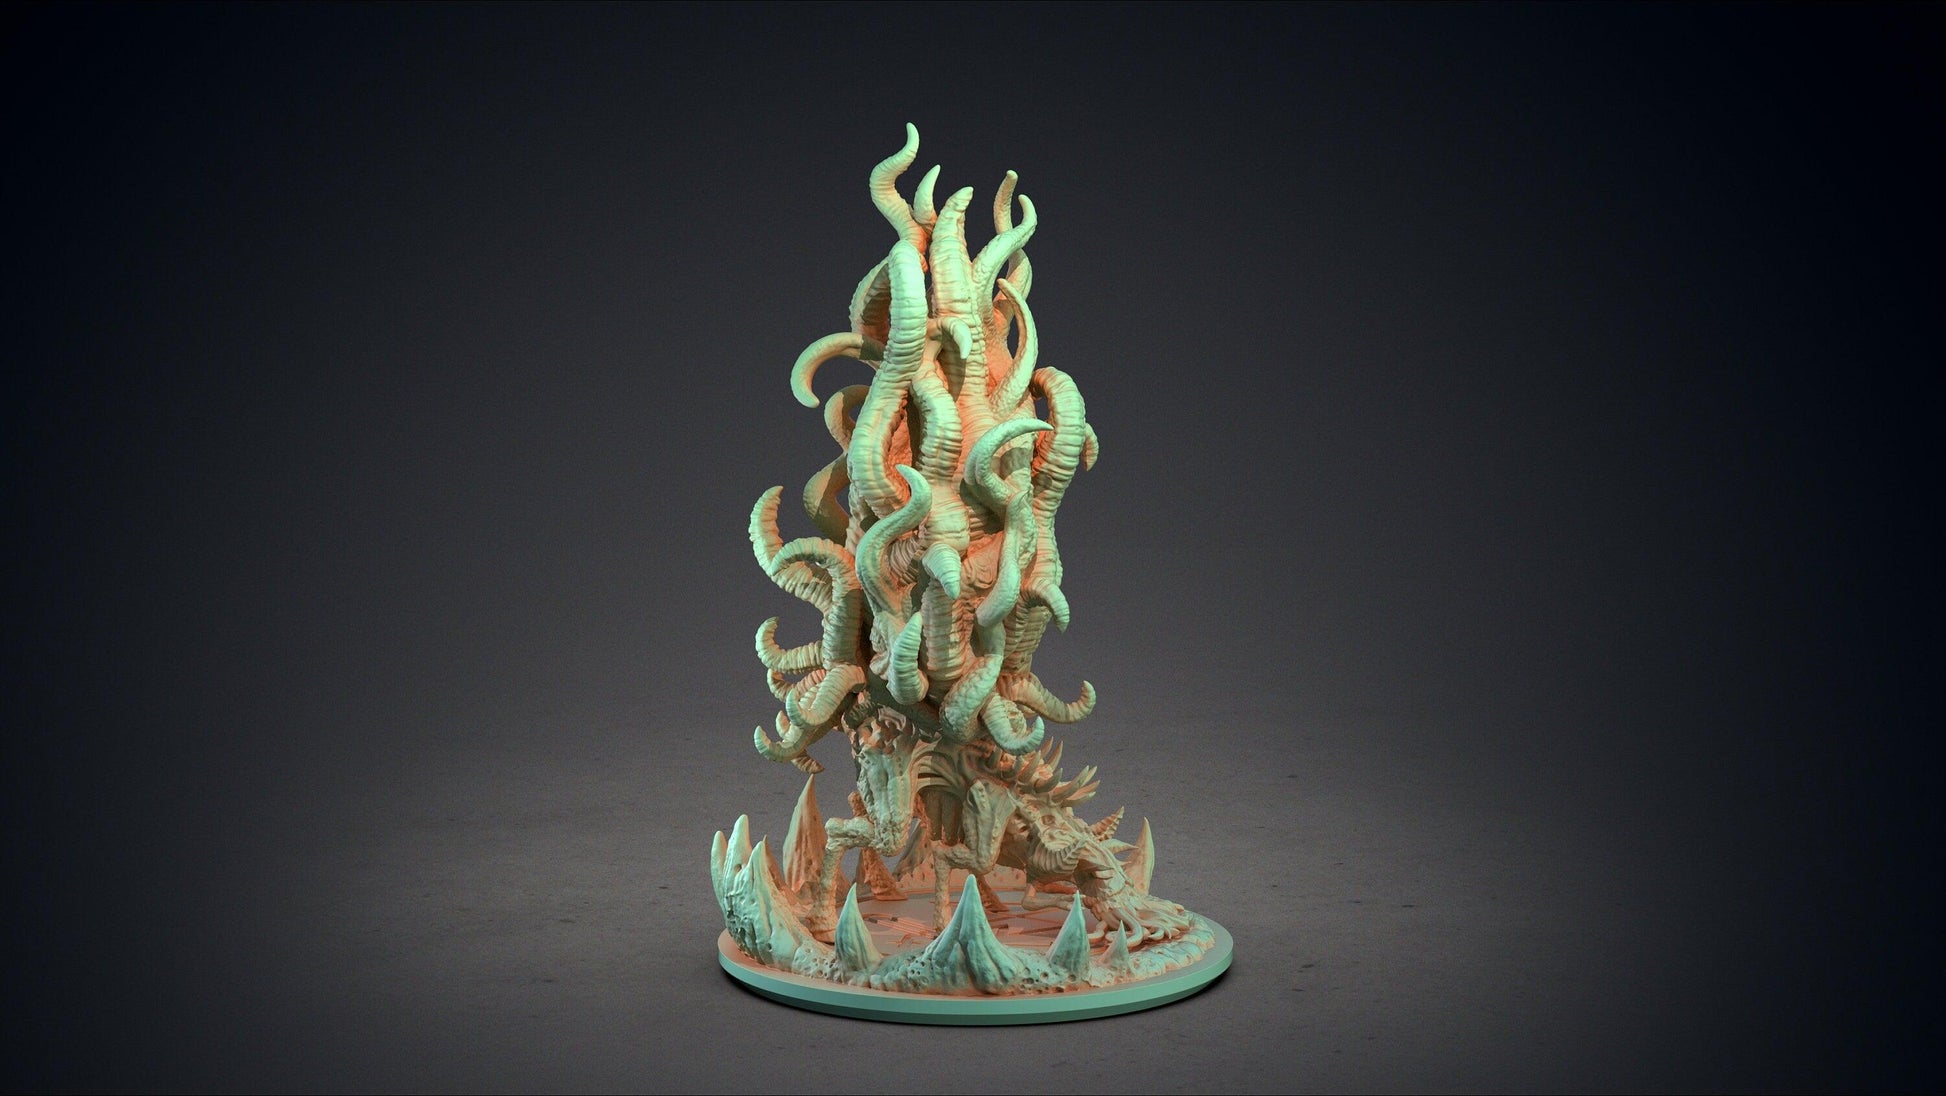 Shub-Niggurath Miniature | Clay Cyanide | Great Old Ones | Cthulhu Statue | DnD Miniature | Dungeons and Dragons | DnD monster miniature - Plague Miniatures shop for DnD Miniatures